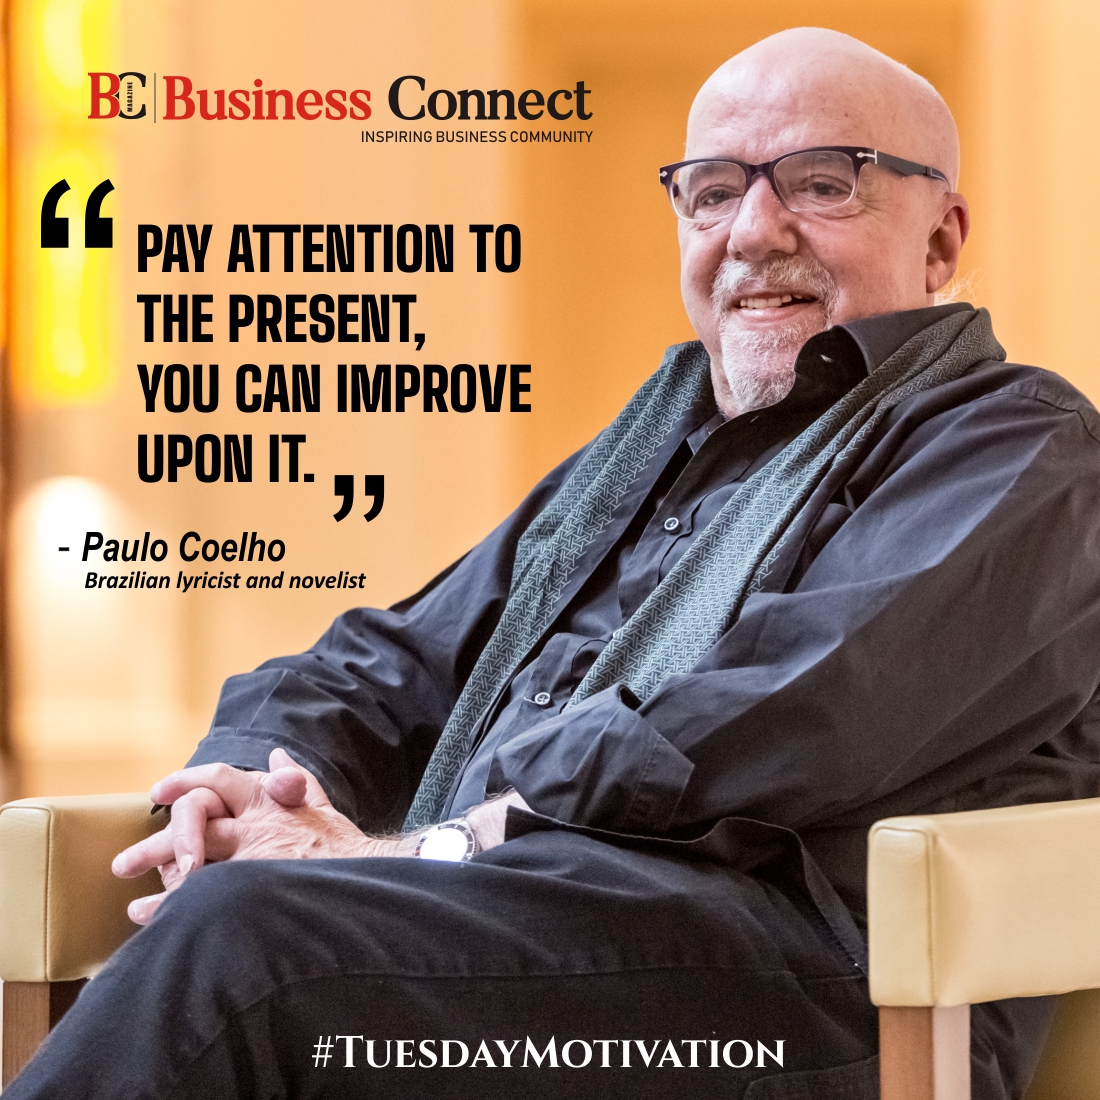 'Pay attention to the present, you can improve upon it.'-Paulo Coelho
#quotesoftheday #quotesdaily #motivationquote #todayquote #PauloCoelho #paulocoelhoquotes #quote #quotes #GauharKhan #motivation #motivationdaily #SambitPatra #motivatonvibes #quotesaboutlife #todayquote